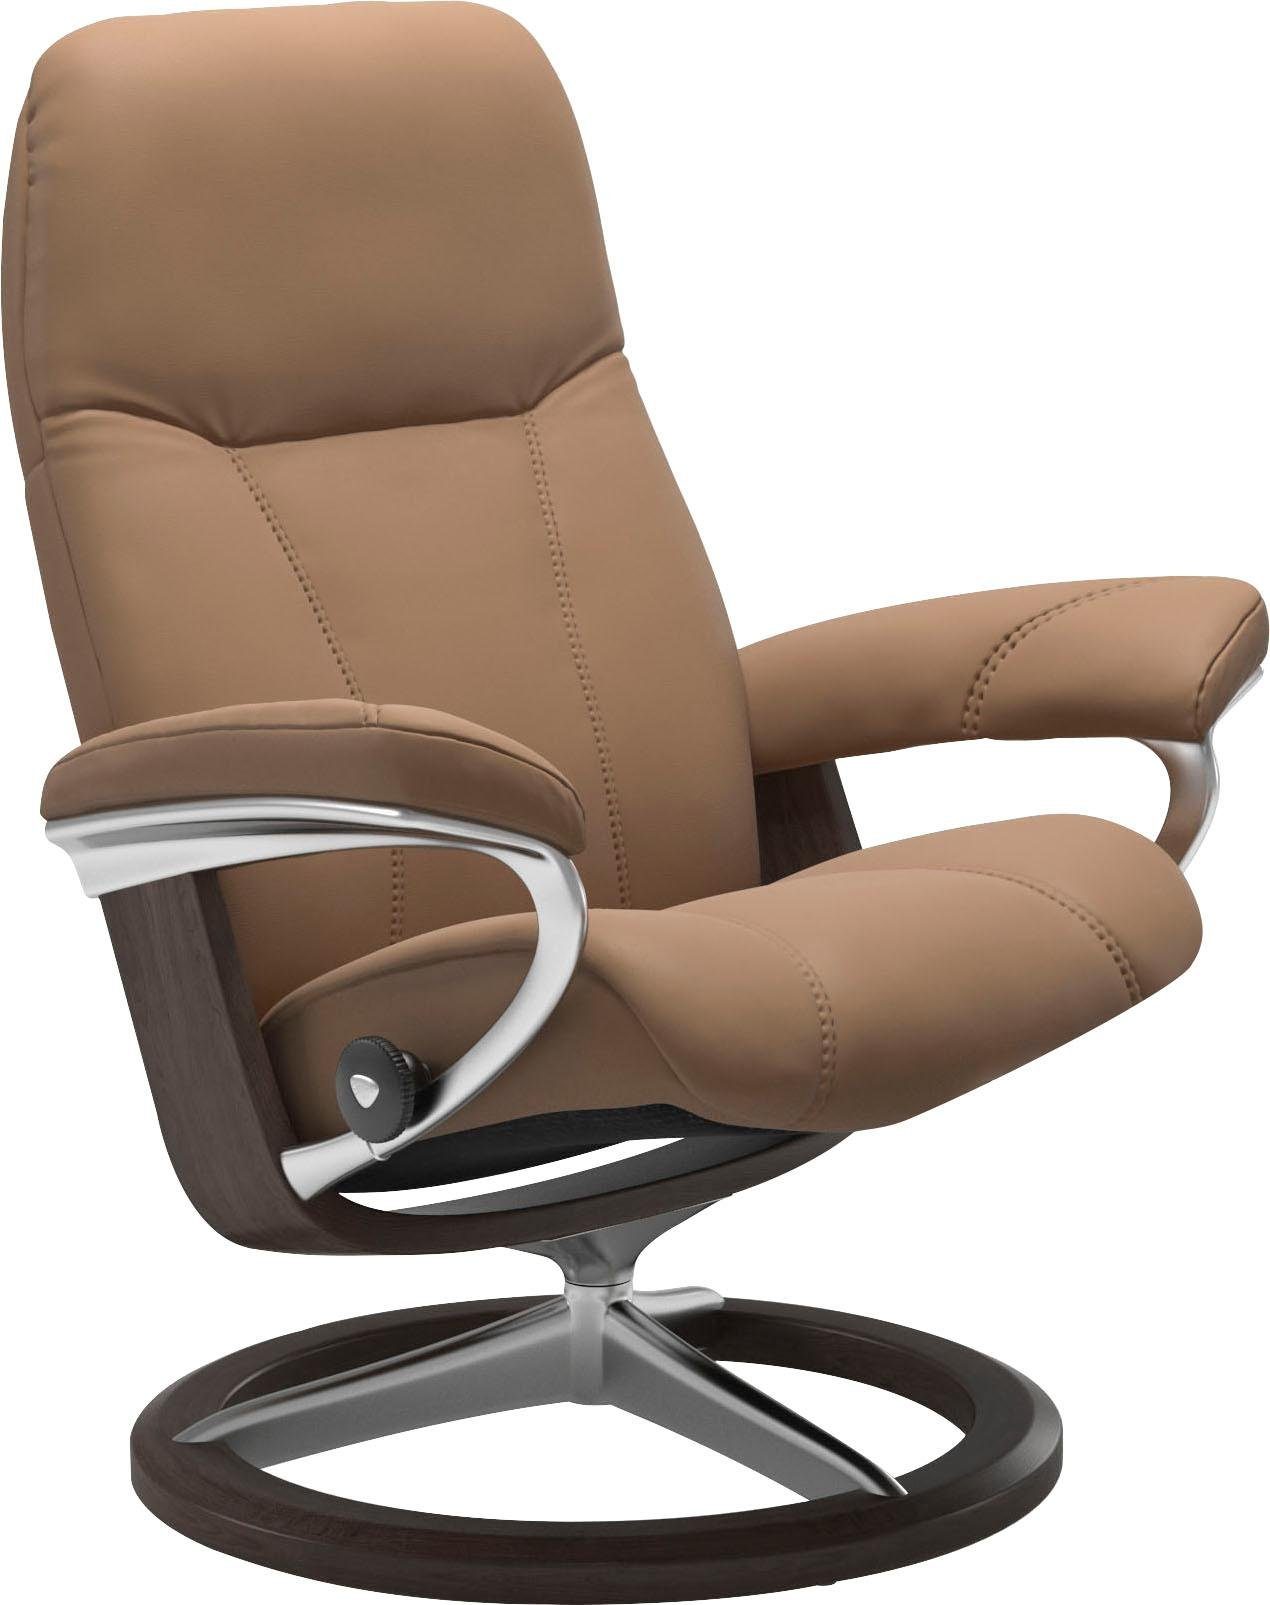 Signature Stressless® Relaxsessel mit Gestell L, Base, Consul, Größe Wenge